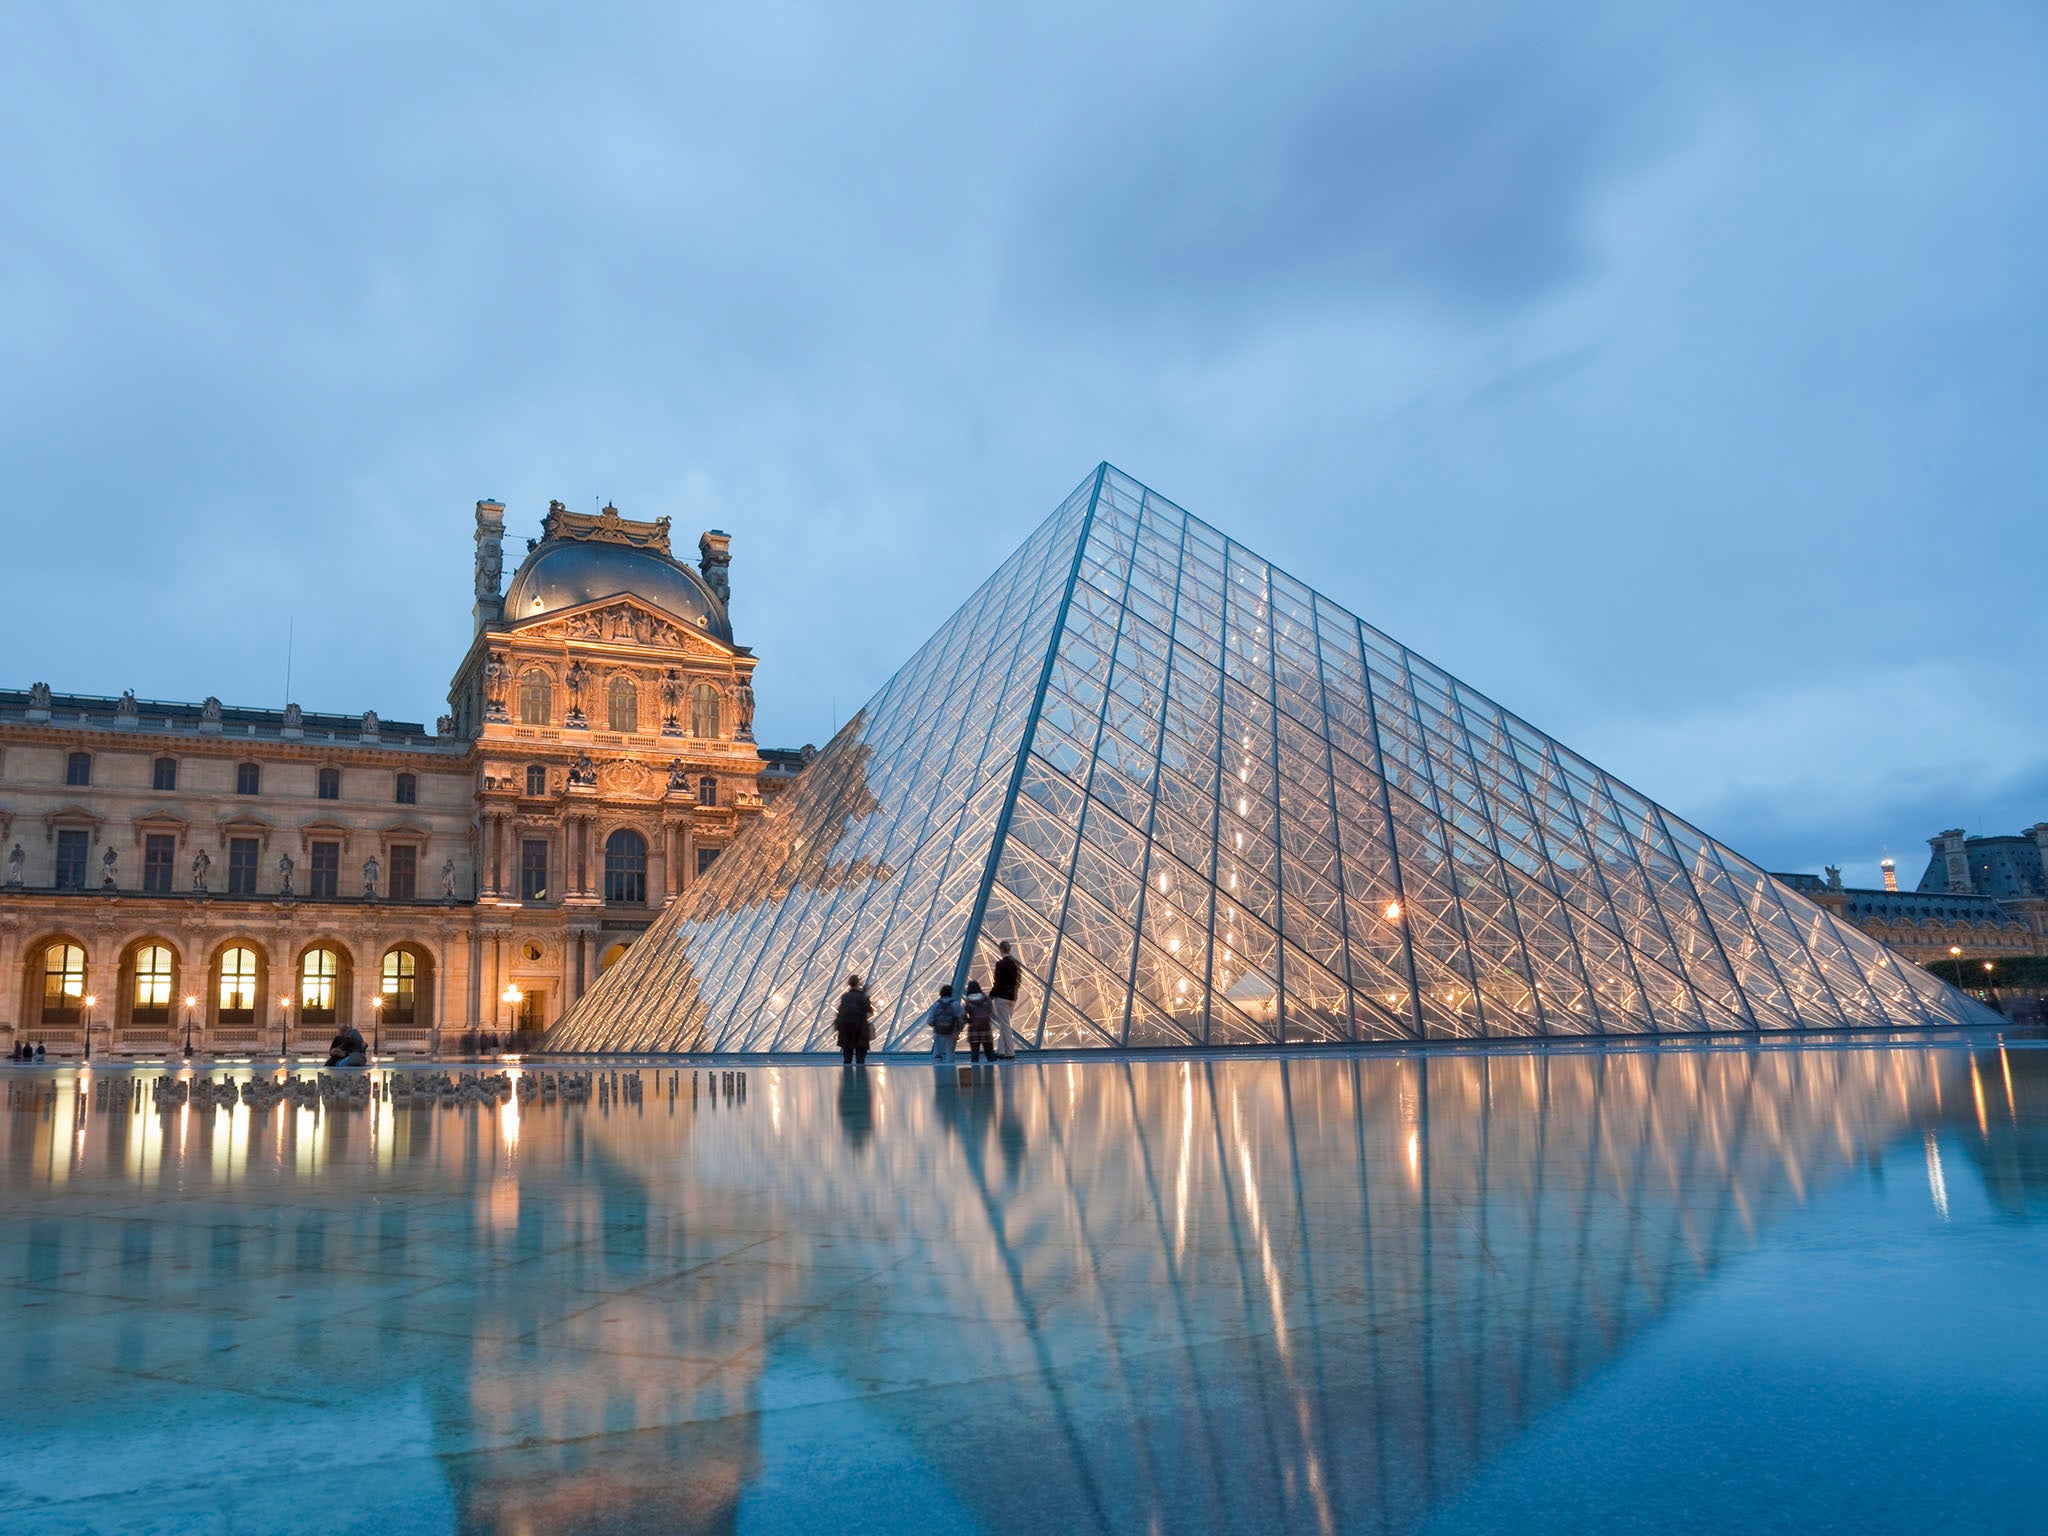 A trip to the Louvre could be just around the corner